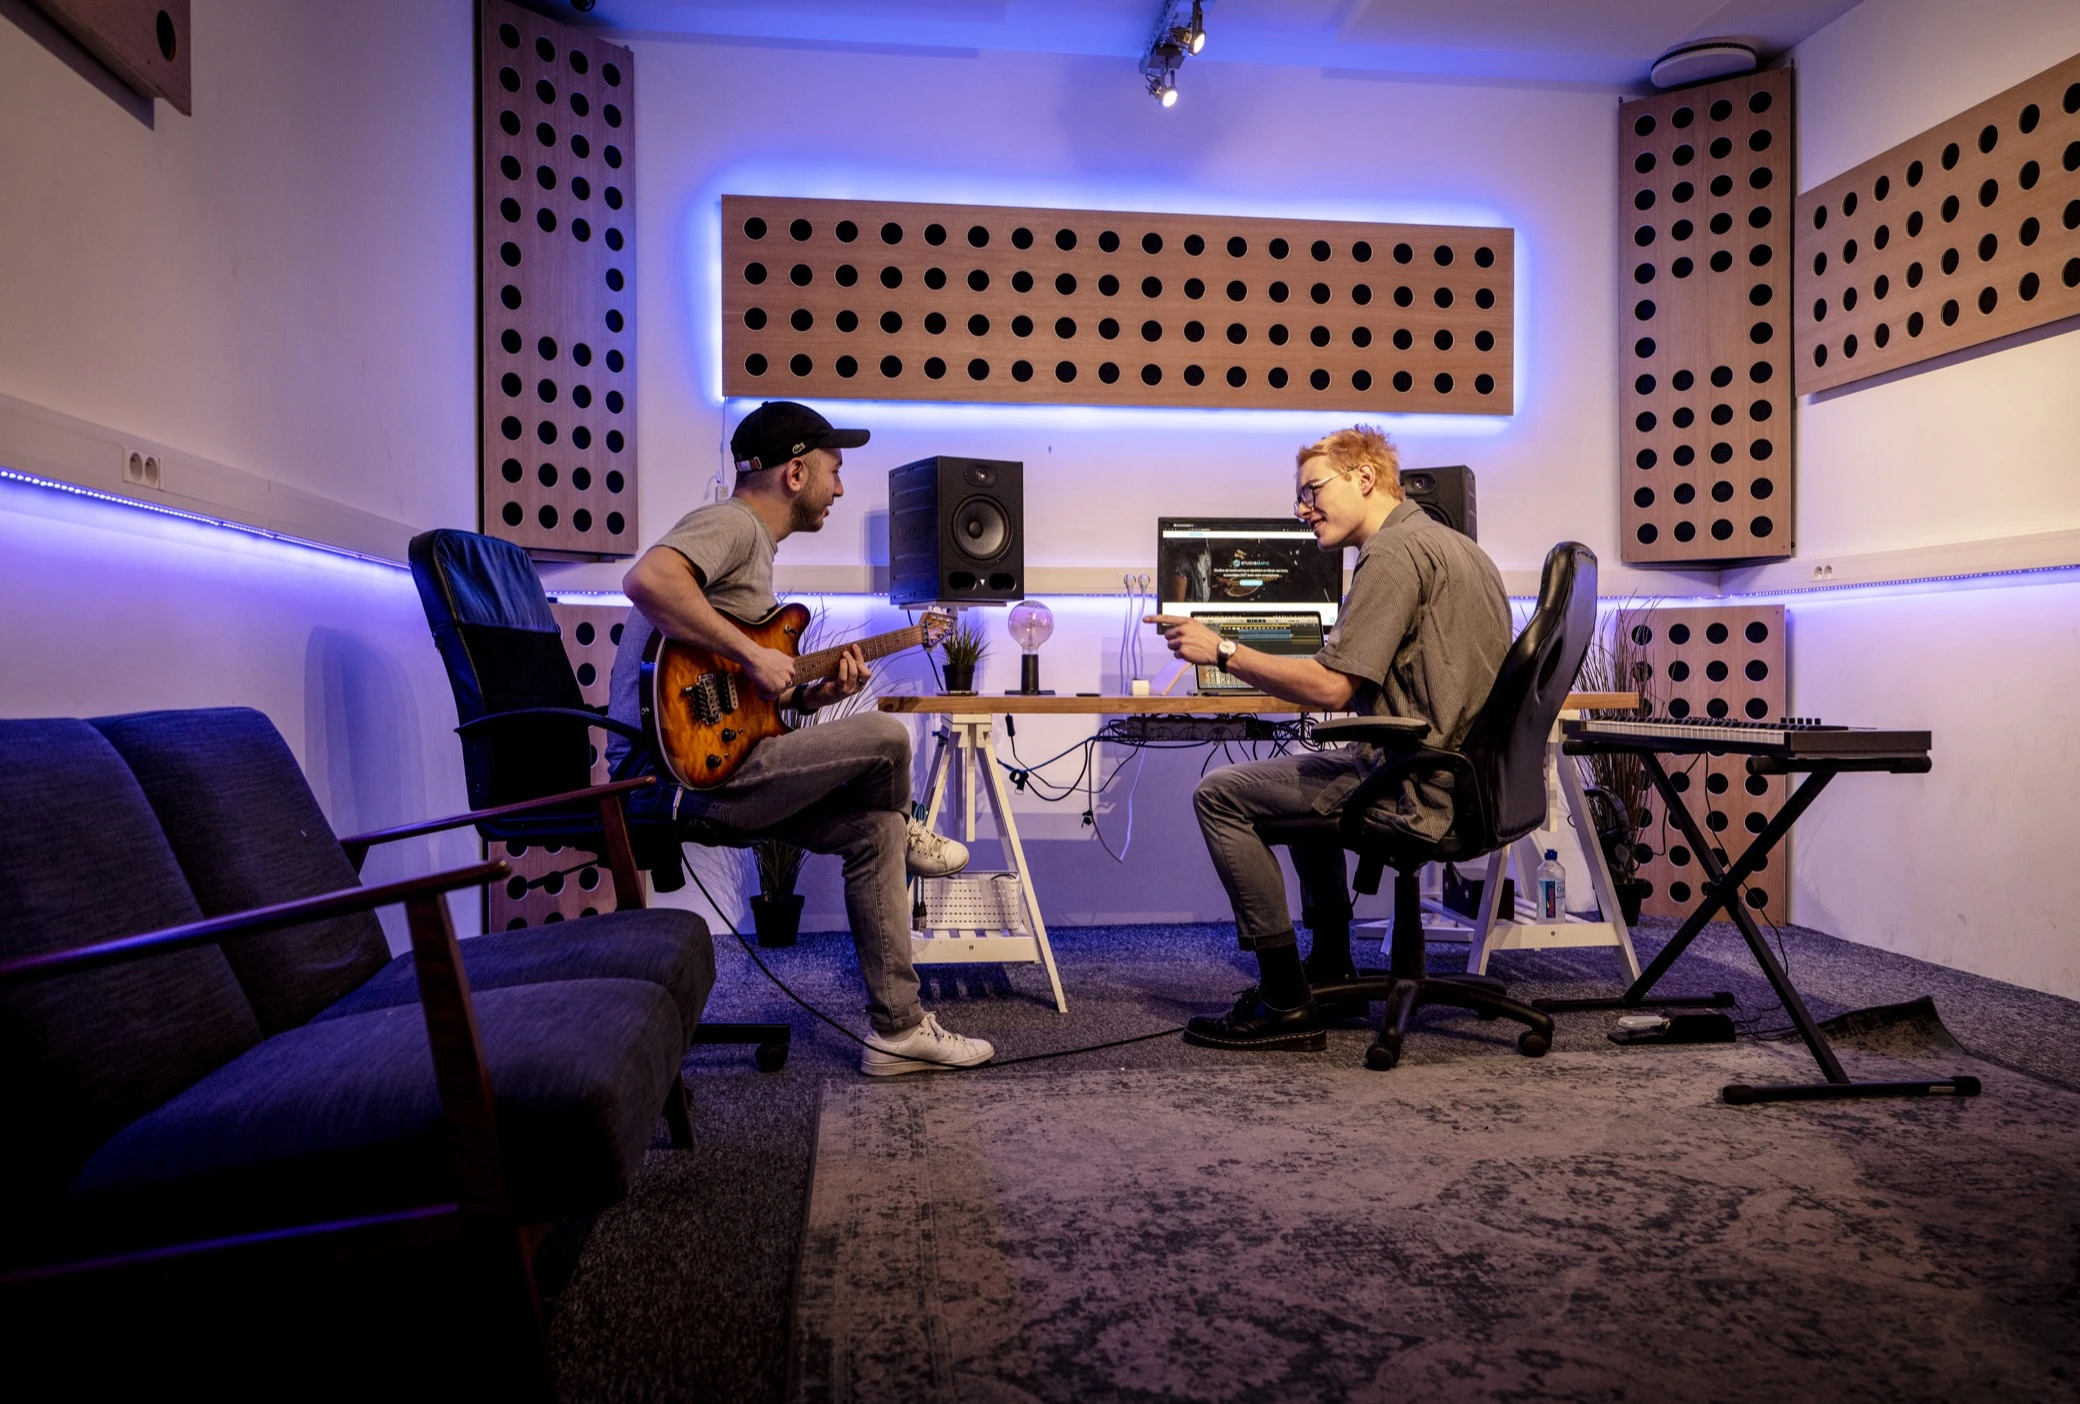 Private and tailor-made music studio for professionals for monthly rental